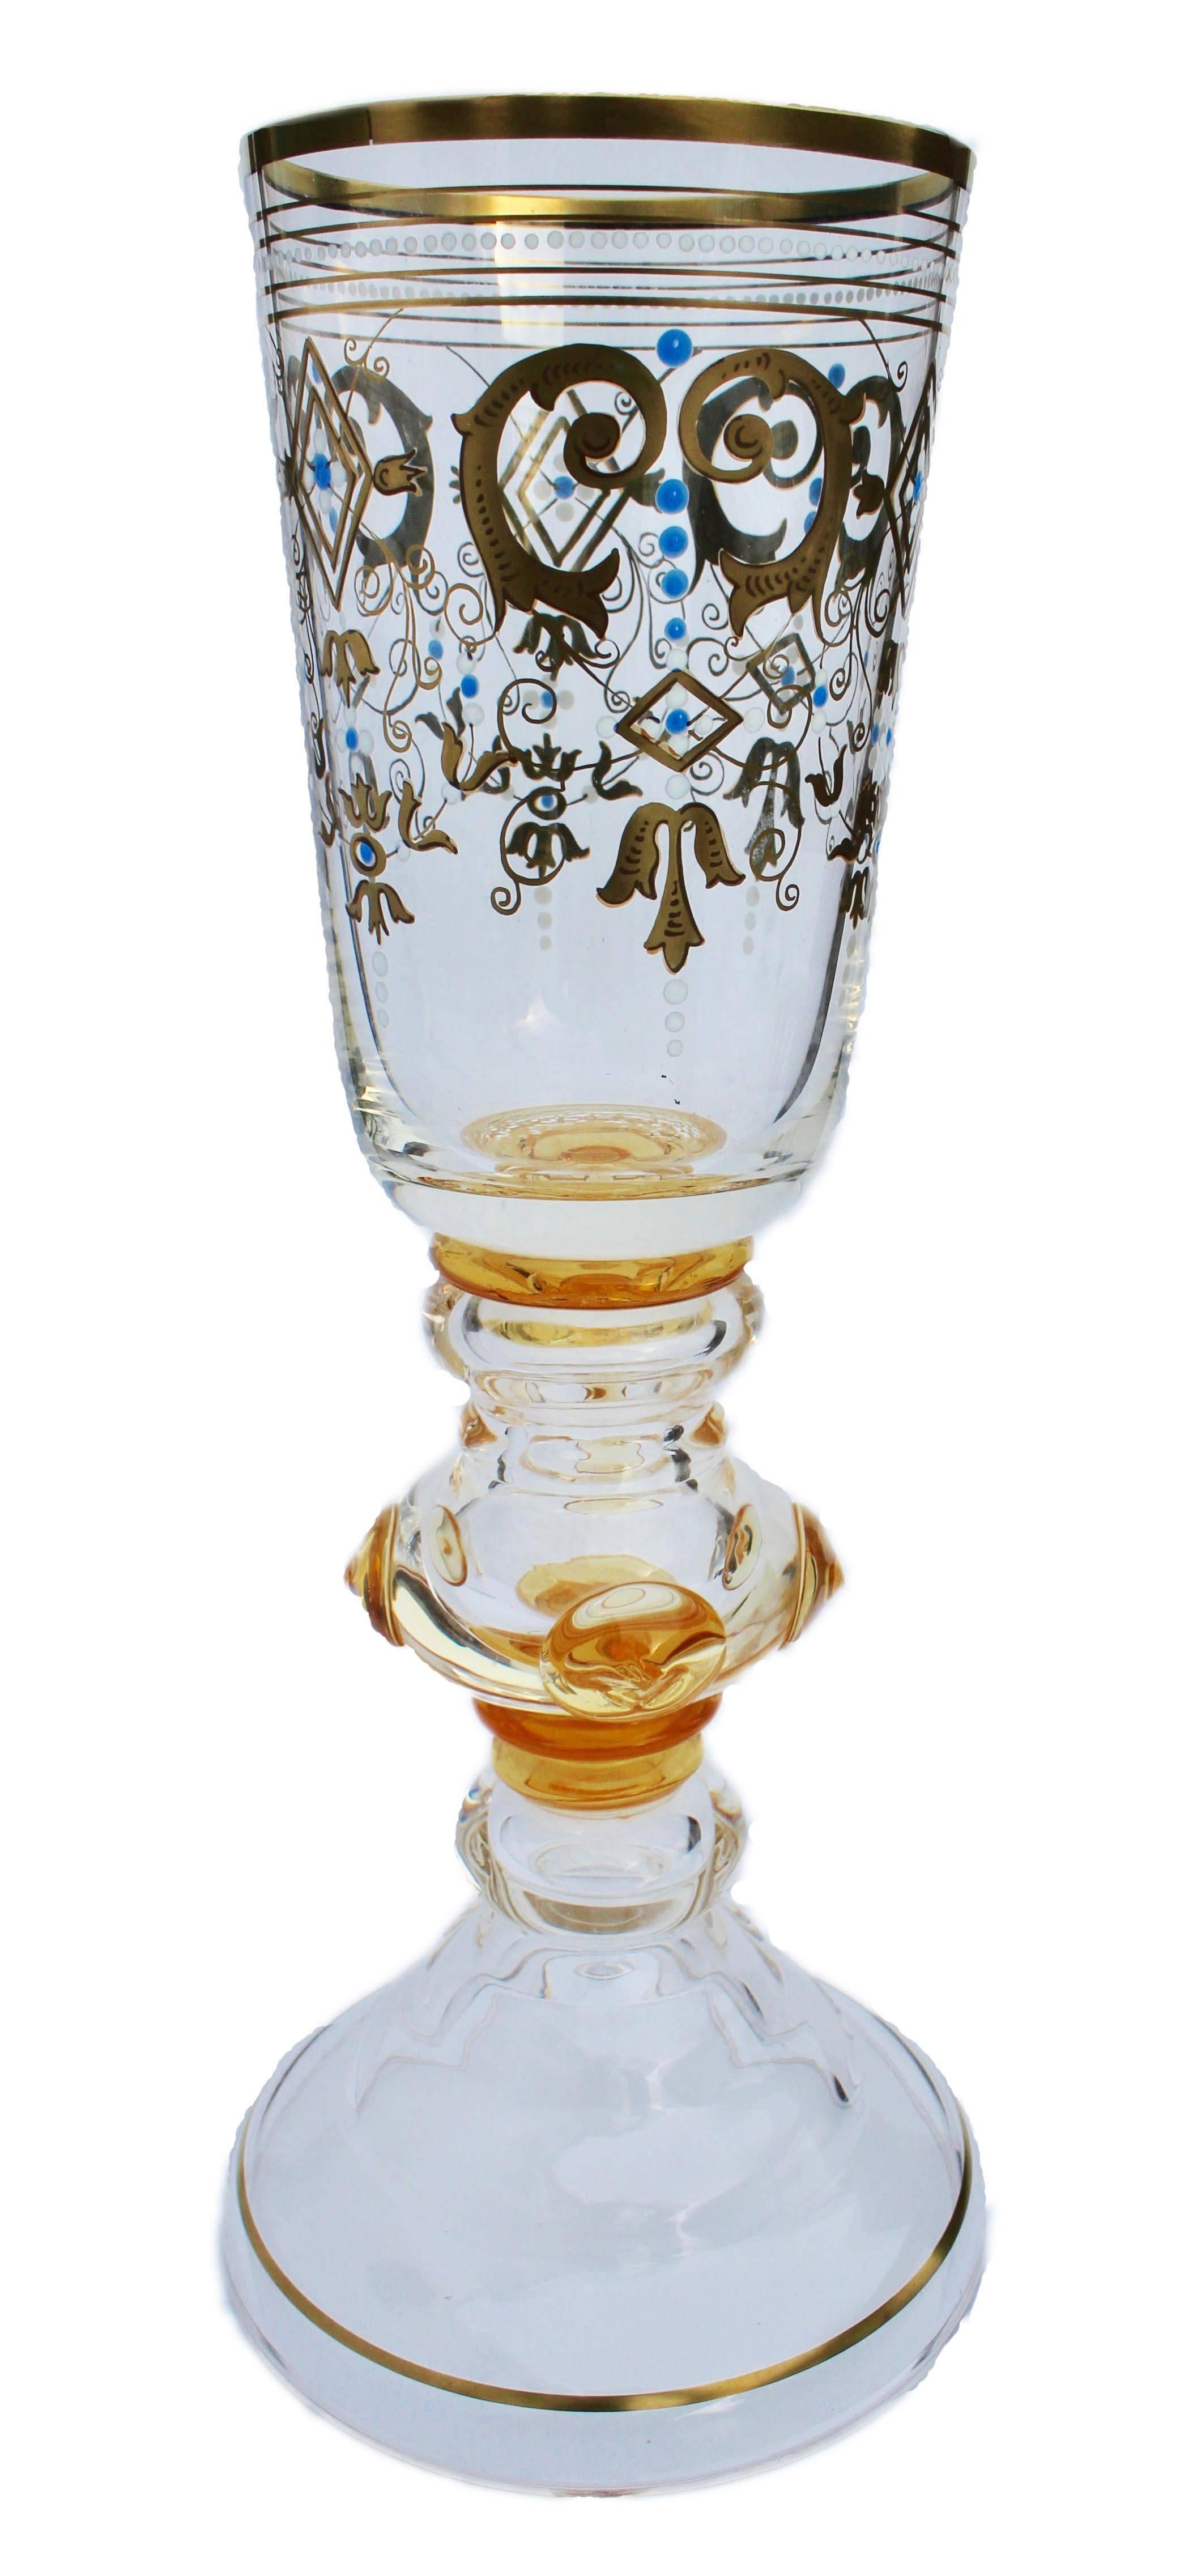 Bohemian glass footed jar, circa 1900s.
This is a real collector’s piece that should not miss in the collection.
This piece is in excellent condition.
Looks simply stunning.

Dimensions:
Height 33 cm, 12.9 inch
Width 12 cm, 4.7